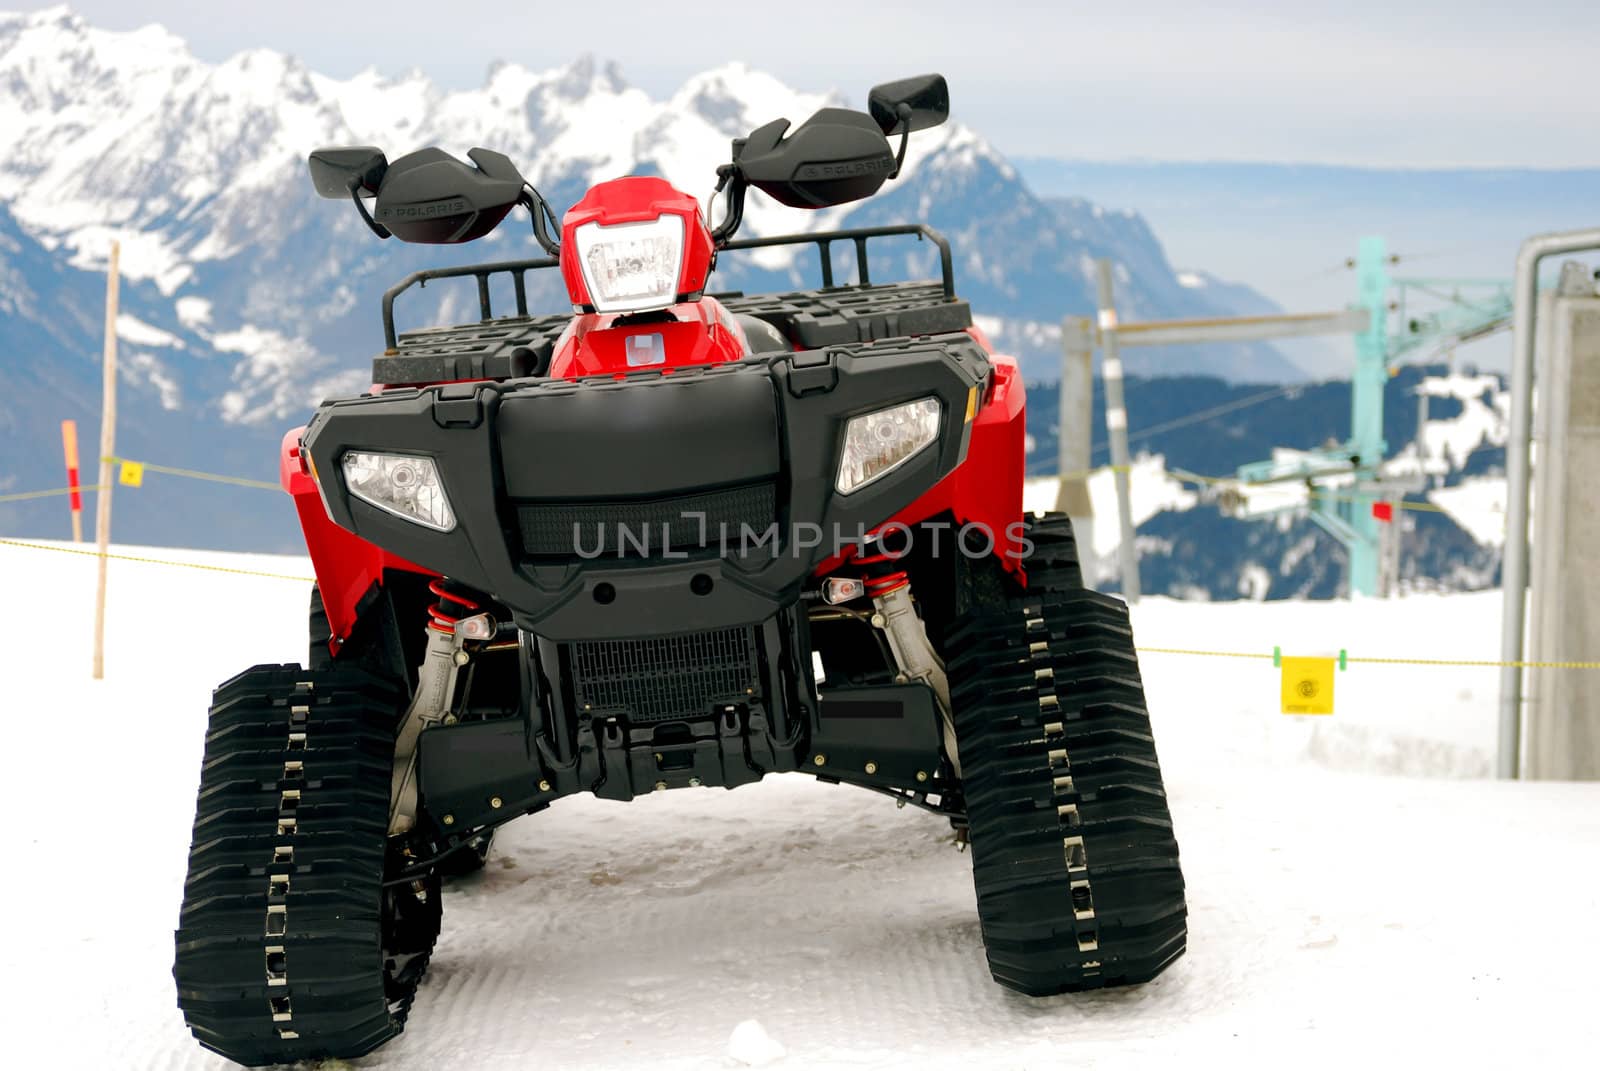 The quadbike in the swiss Alpes